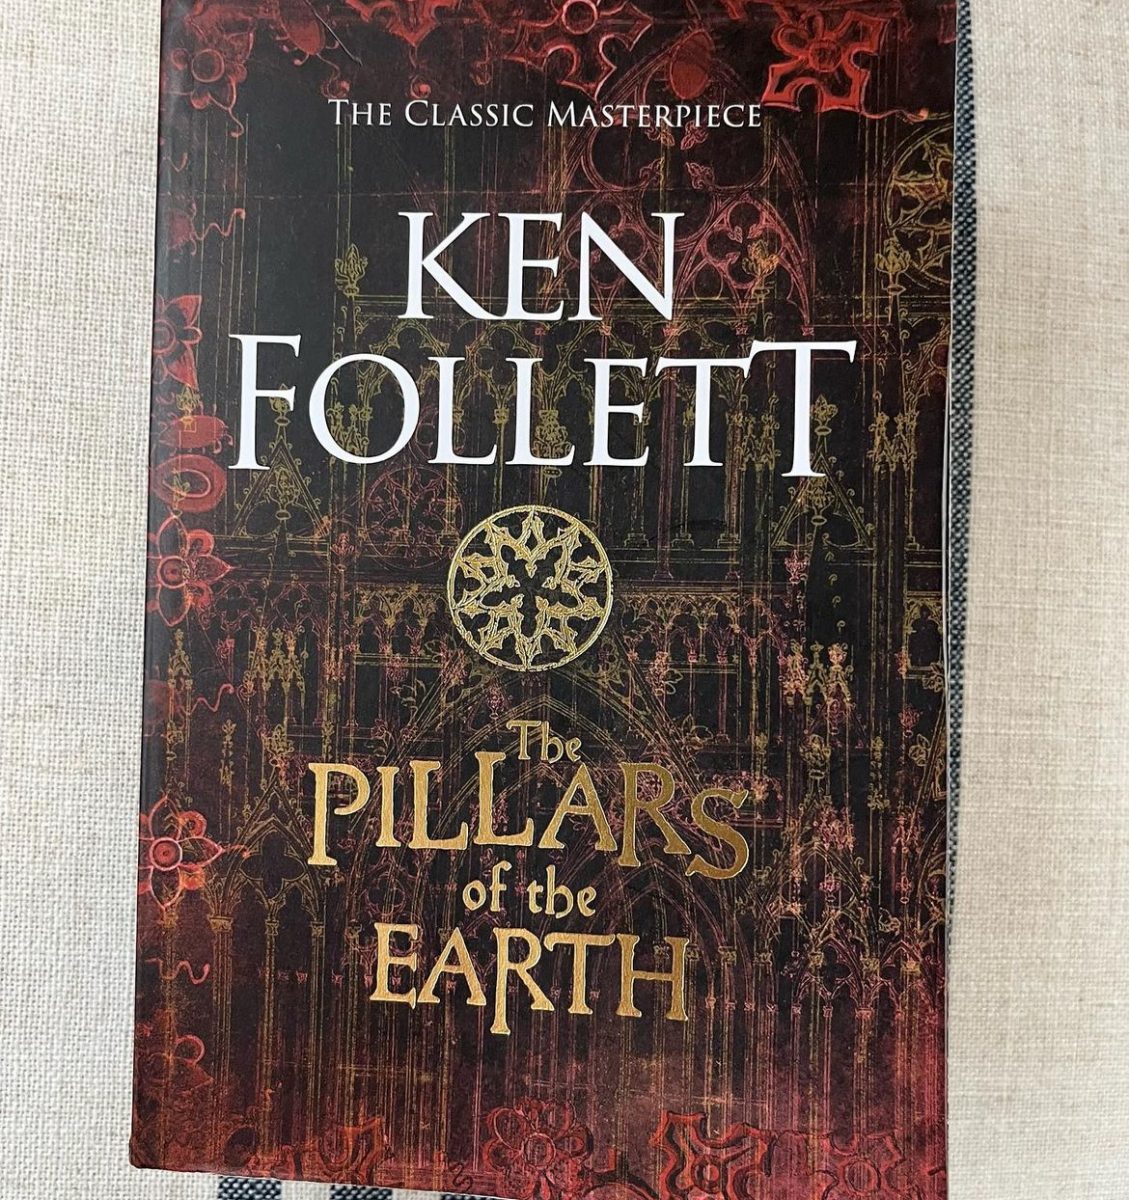 The Muse: Ken Follet’s Pillars of the Earth Stands Strong 34 Years Later